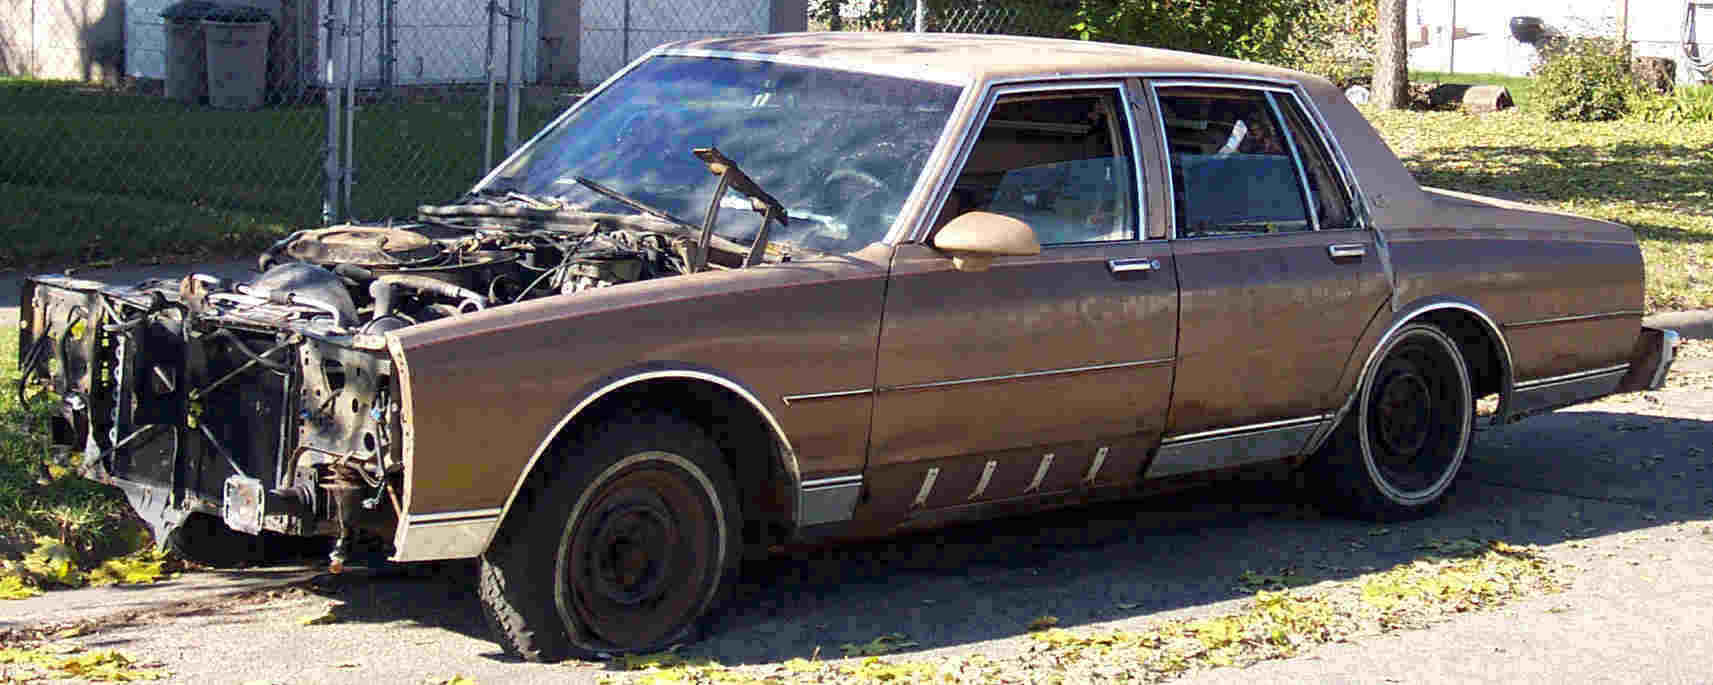 How Your Junk Car Can Save You Money